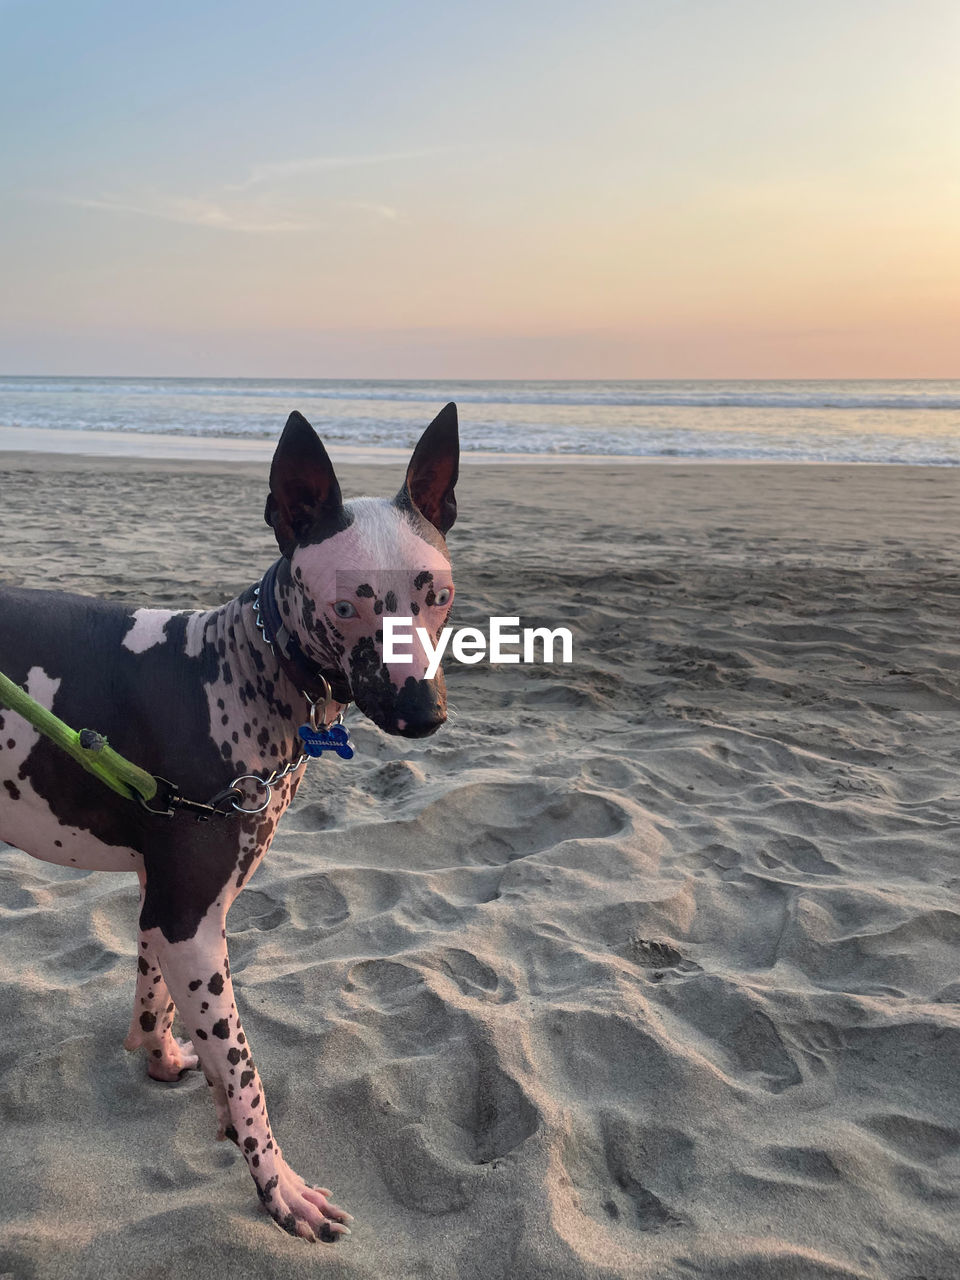 sea, beach, sky, land, dog, domestic animals, pet, canine, water, animal, mammal, animal themes, horizon, one animal, horizon over water, nature, sunset, sand, beauty in nature, scenics - nature, full length, motion, ocean, french bulldog, outdoors, tranquility, one person, copy space